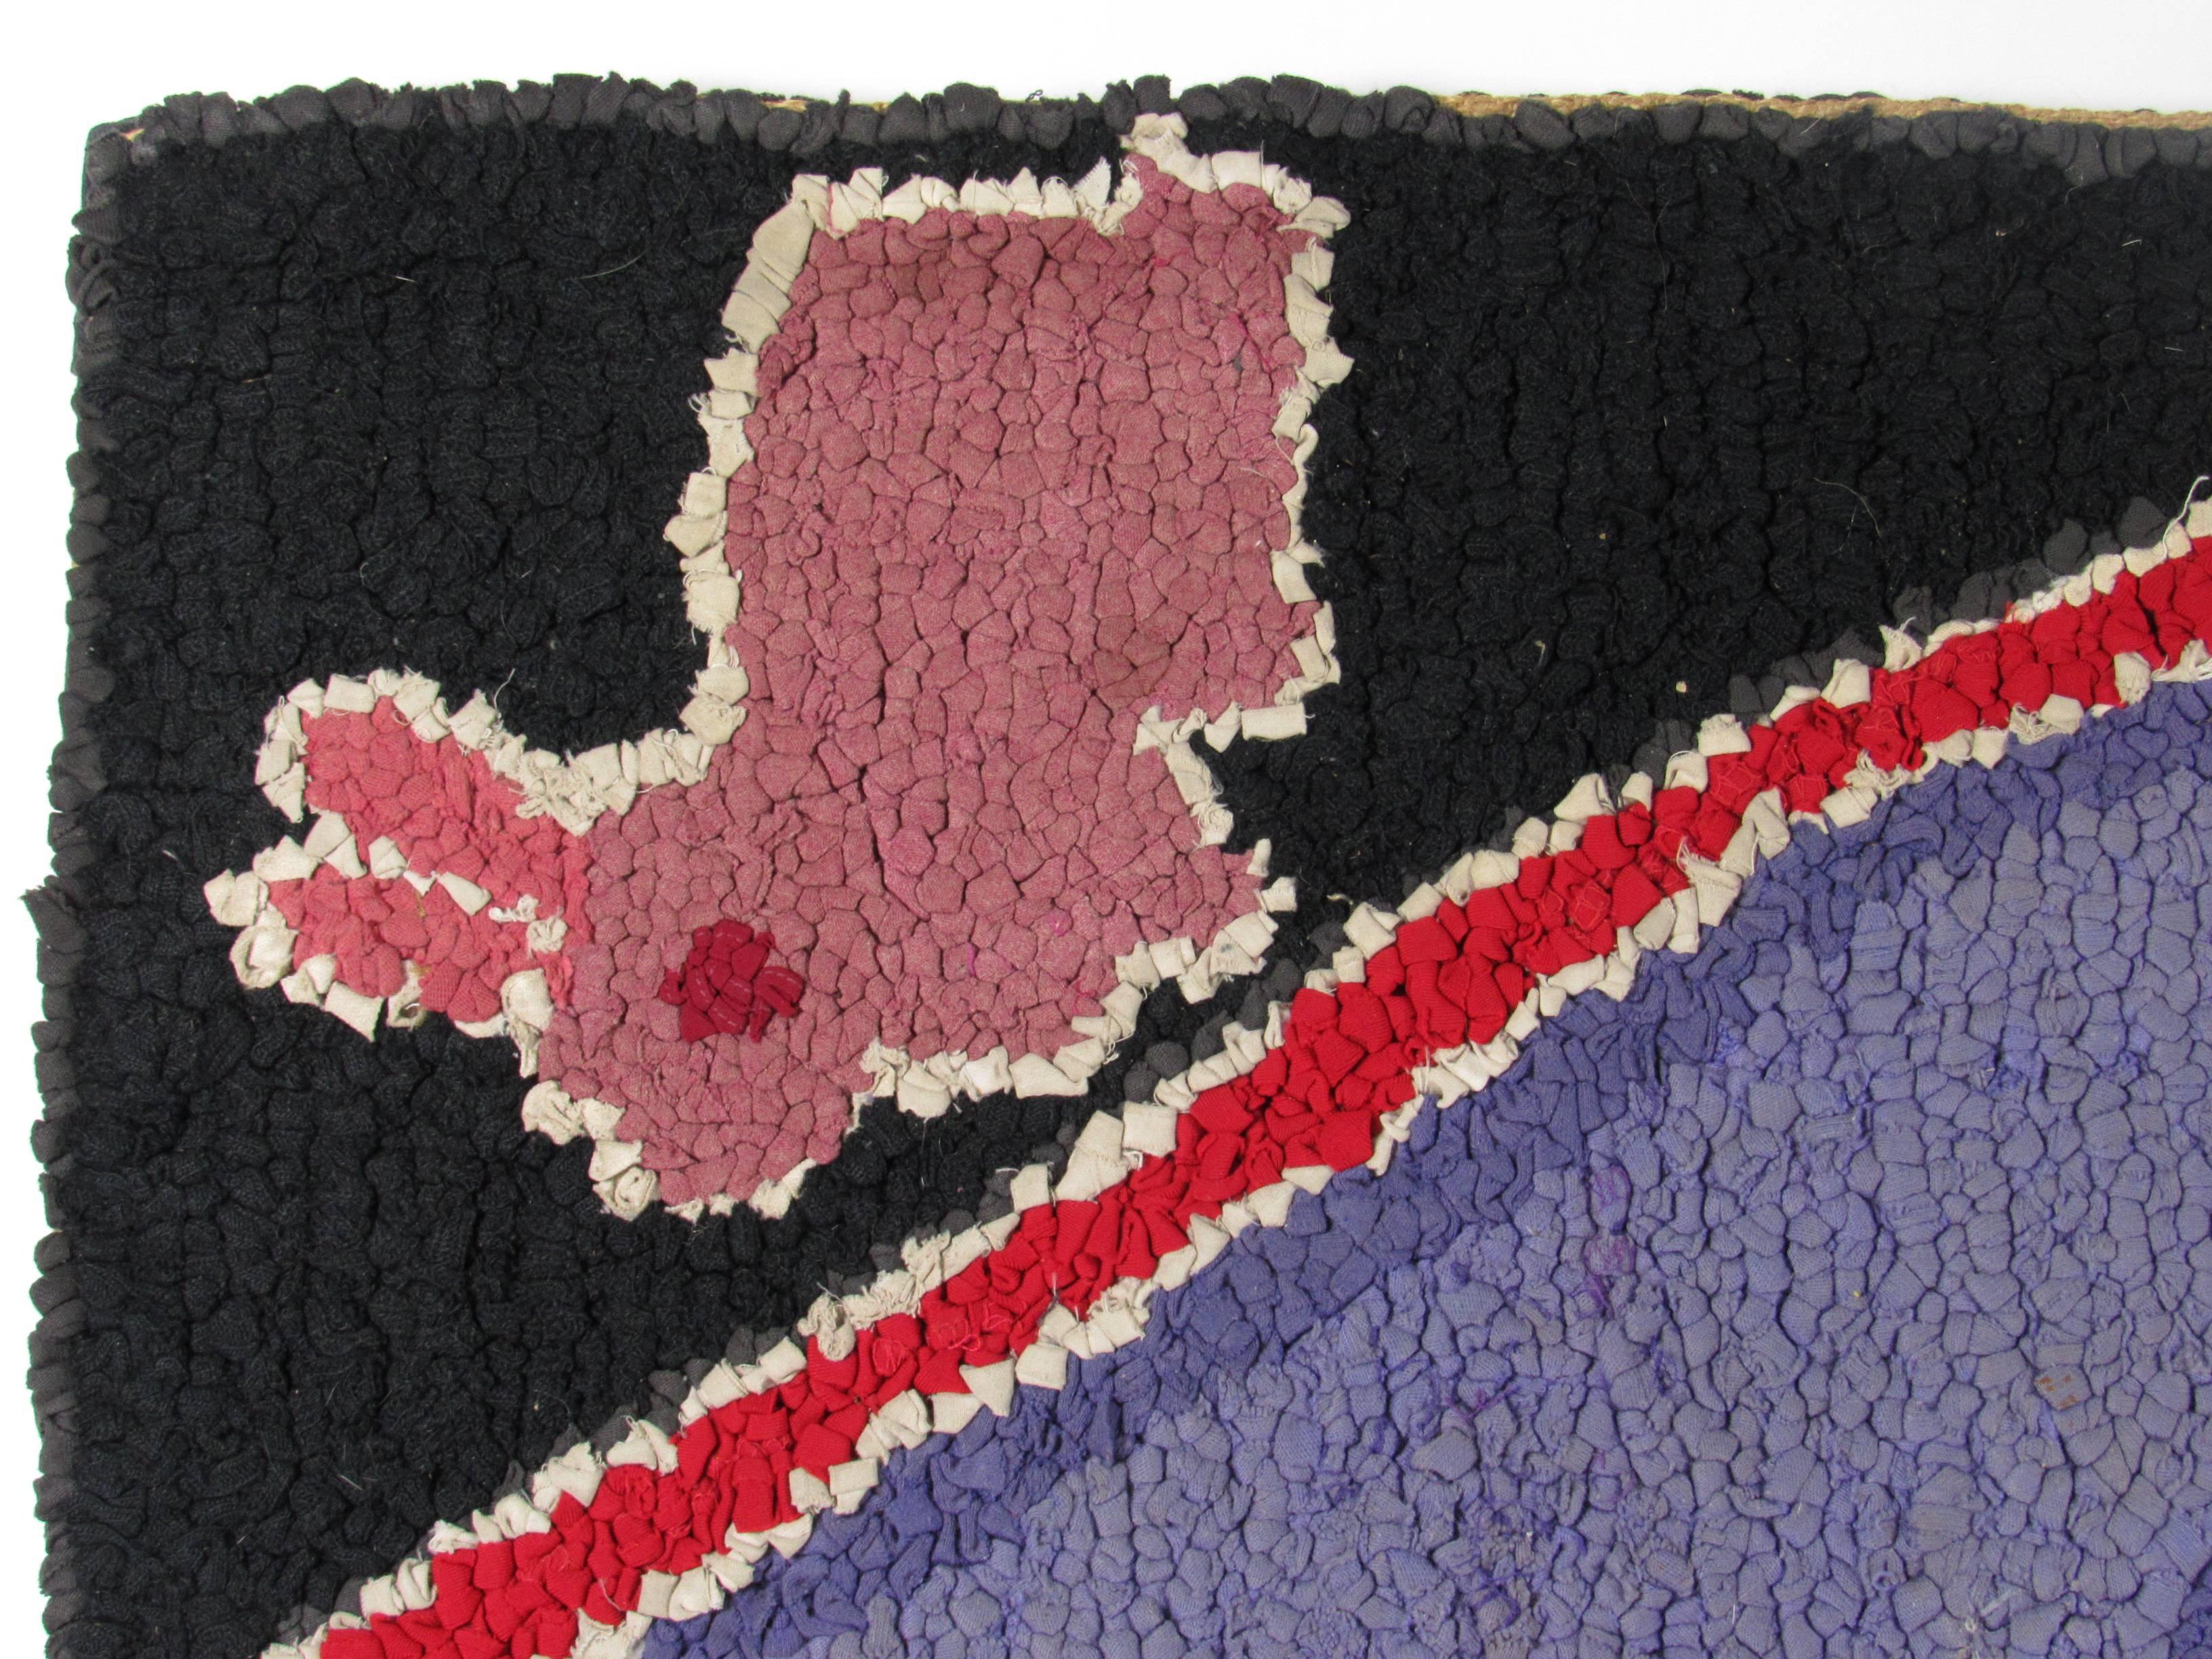 American Folk Art Rabbit in Diamond Hooked Rug, late 19th century.  A brown rabbit against a blue/purple ground sits in the center diamond form medallion surrounded by four pink rabbits on black ground.  Mounted on black fabric and new stretchers. 